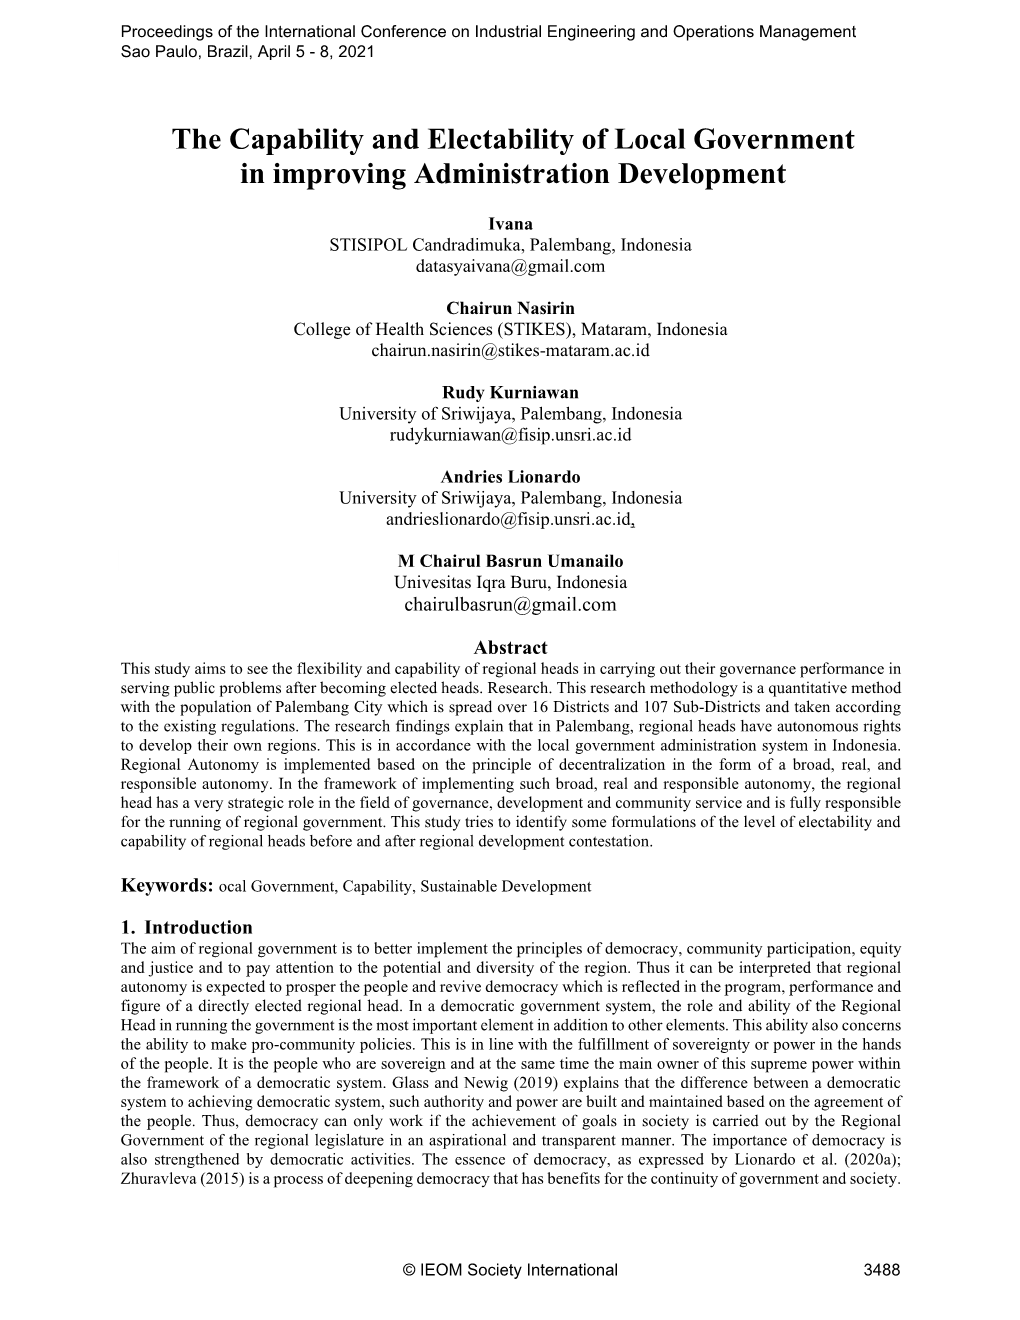 The Capability and Electability of Local Government in Improving Administration Development